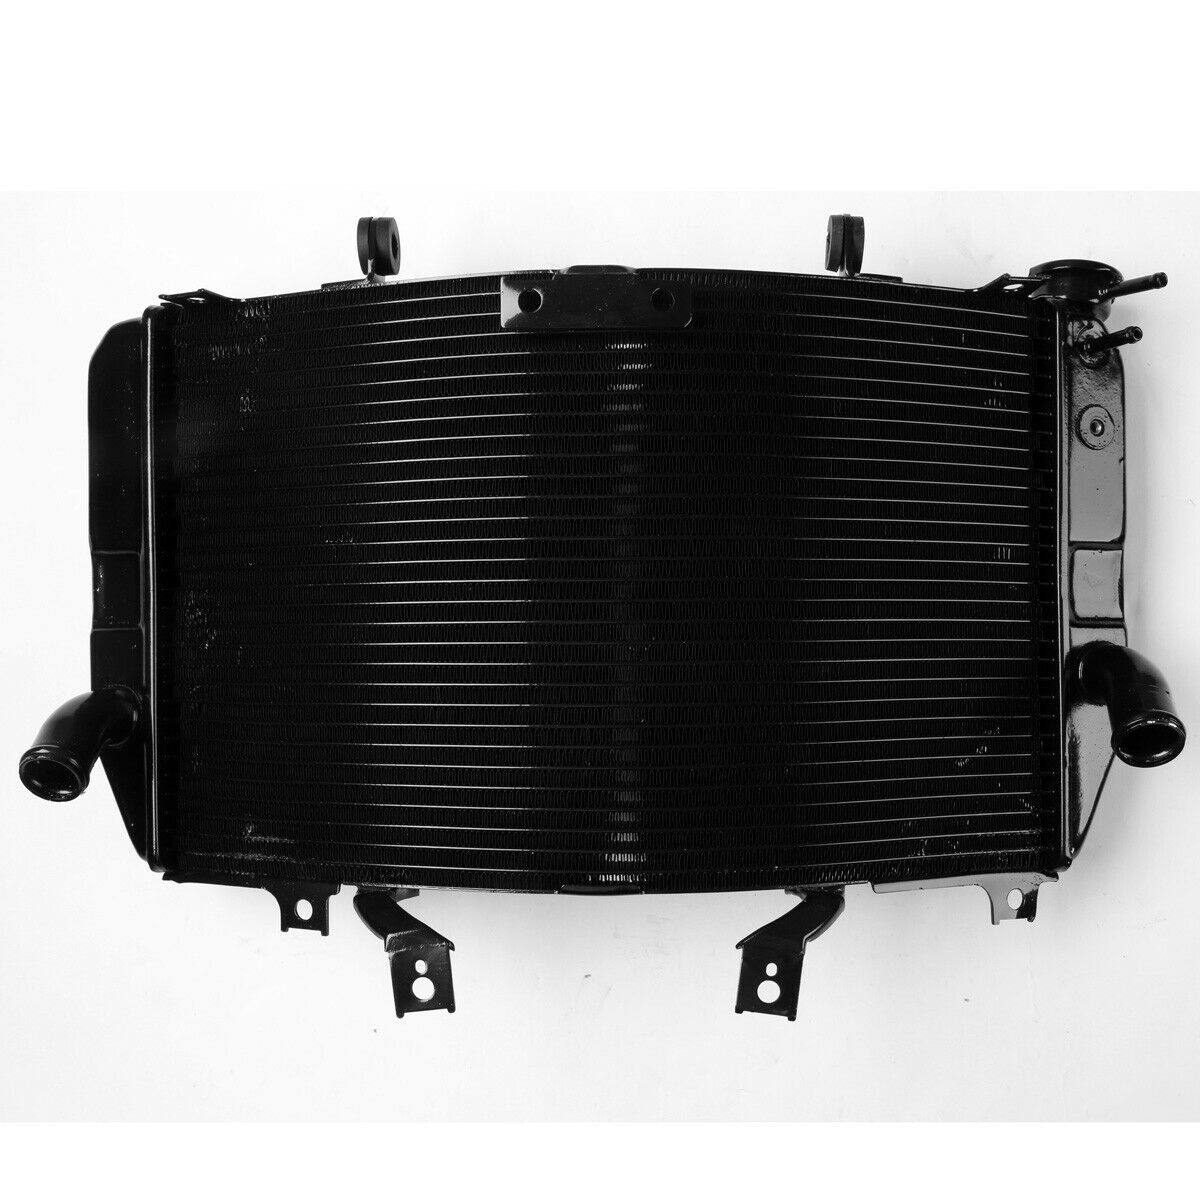 Black Radiator Engine Cooling Fit For Suzuki GSXR1000 GSX-R1000 03-04 2003 2004 - Moto Life Products